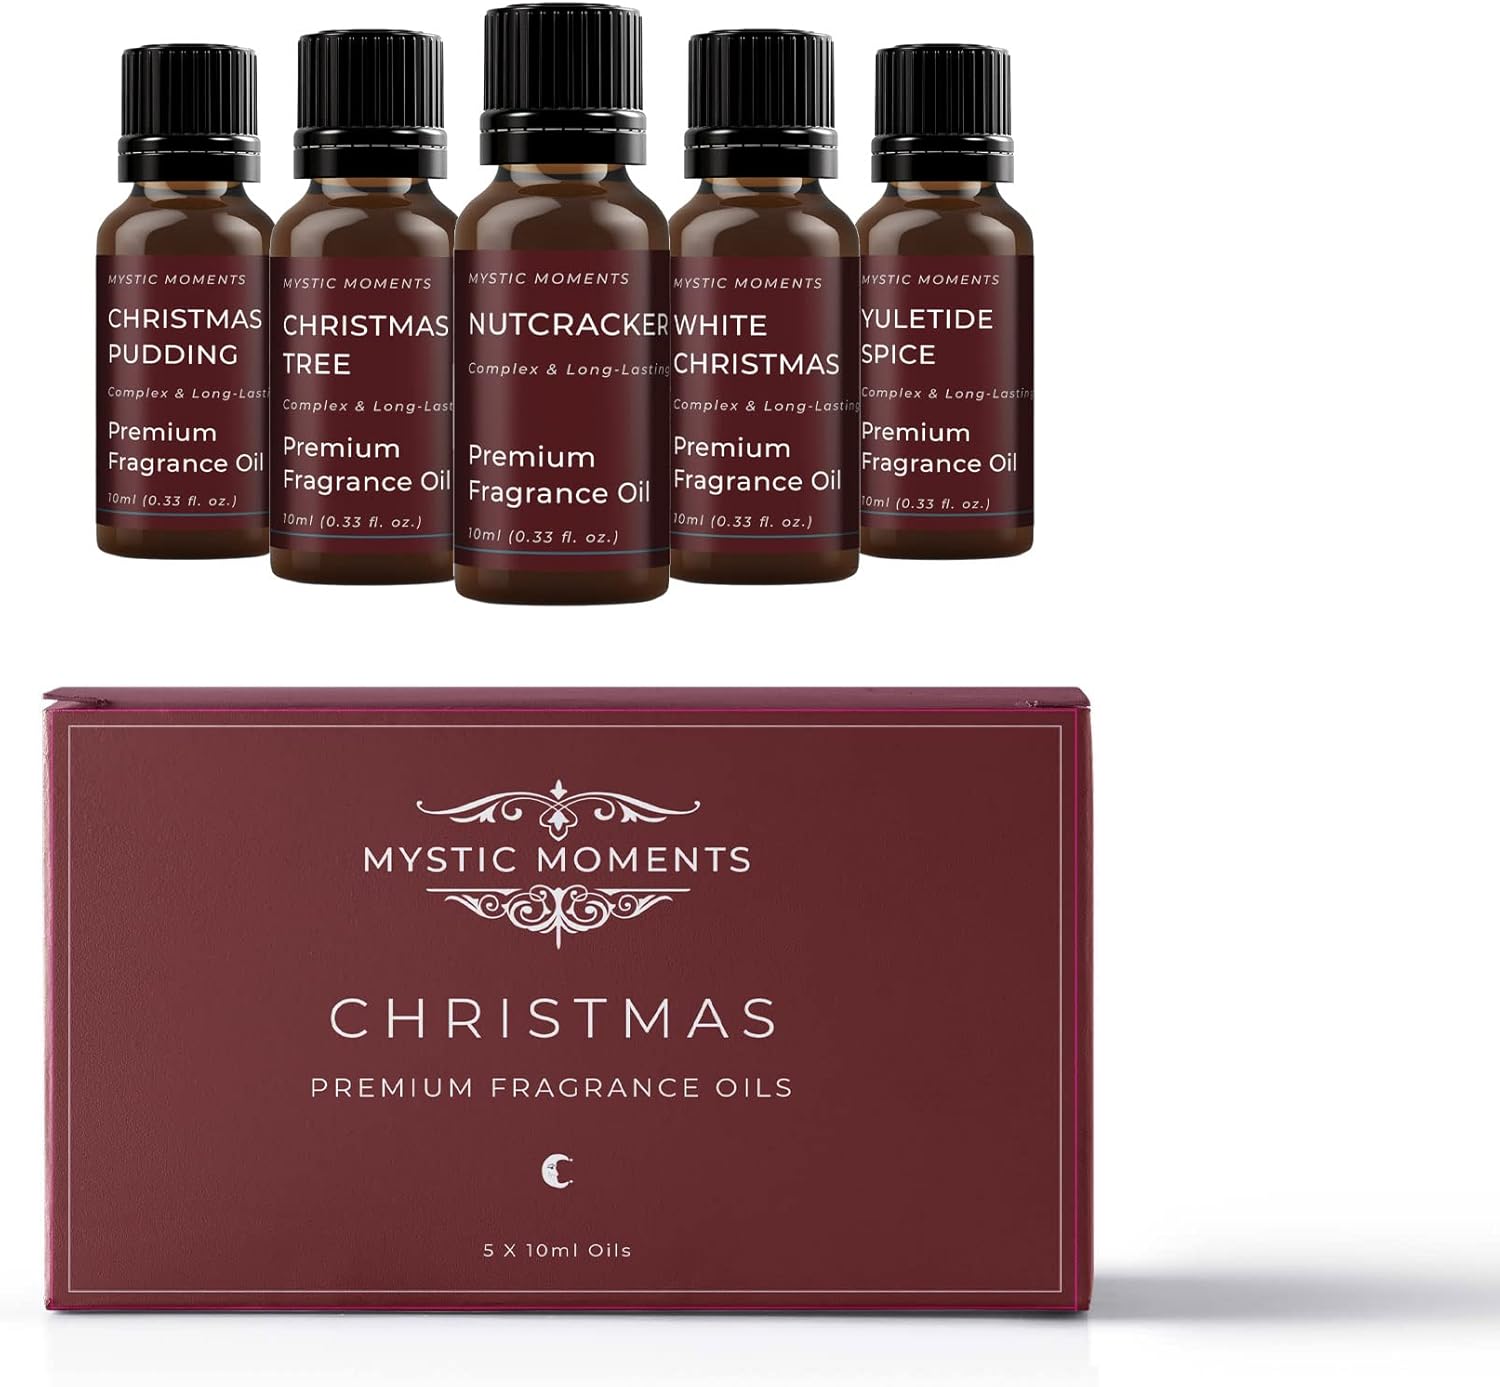 Mystic Moments | Christmas Fragrance Oil Gift Starter Pack 5x10ml | Christmas Pudding, Christmas Tree, Nutcracker, White Christmas, Yuletide Spice | Perfect as a gift